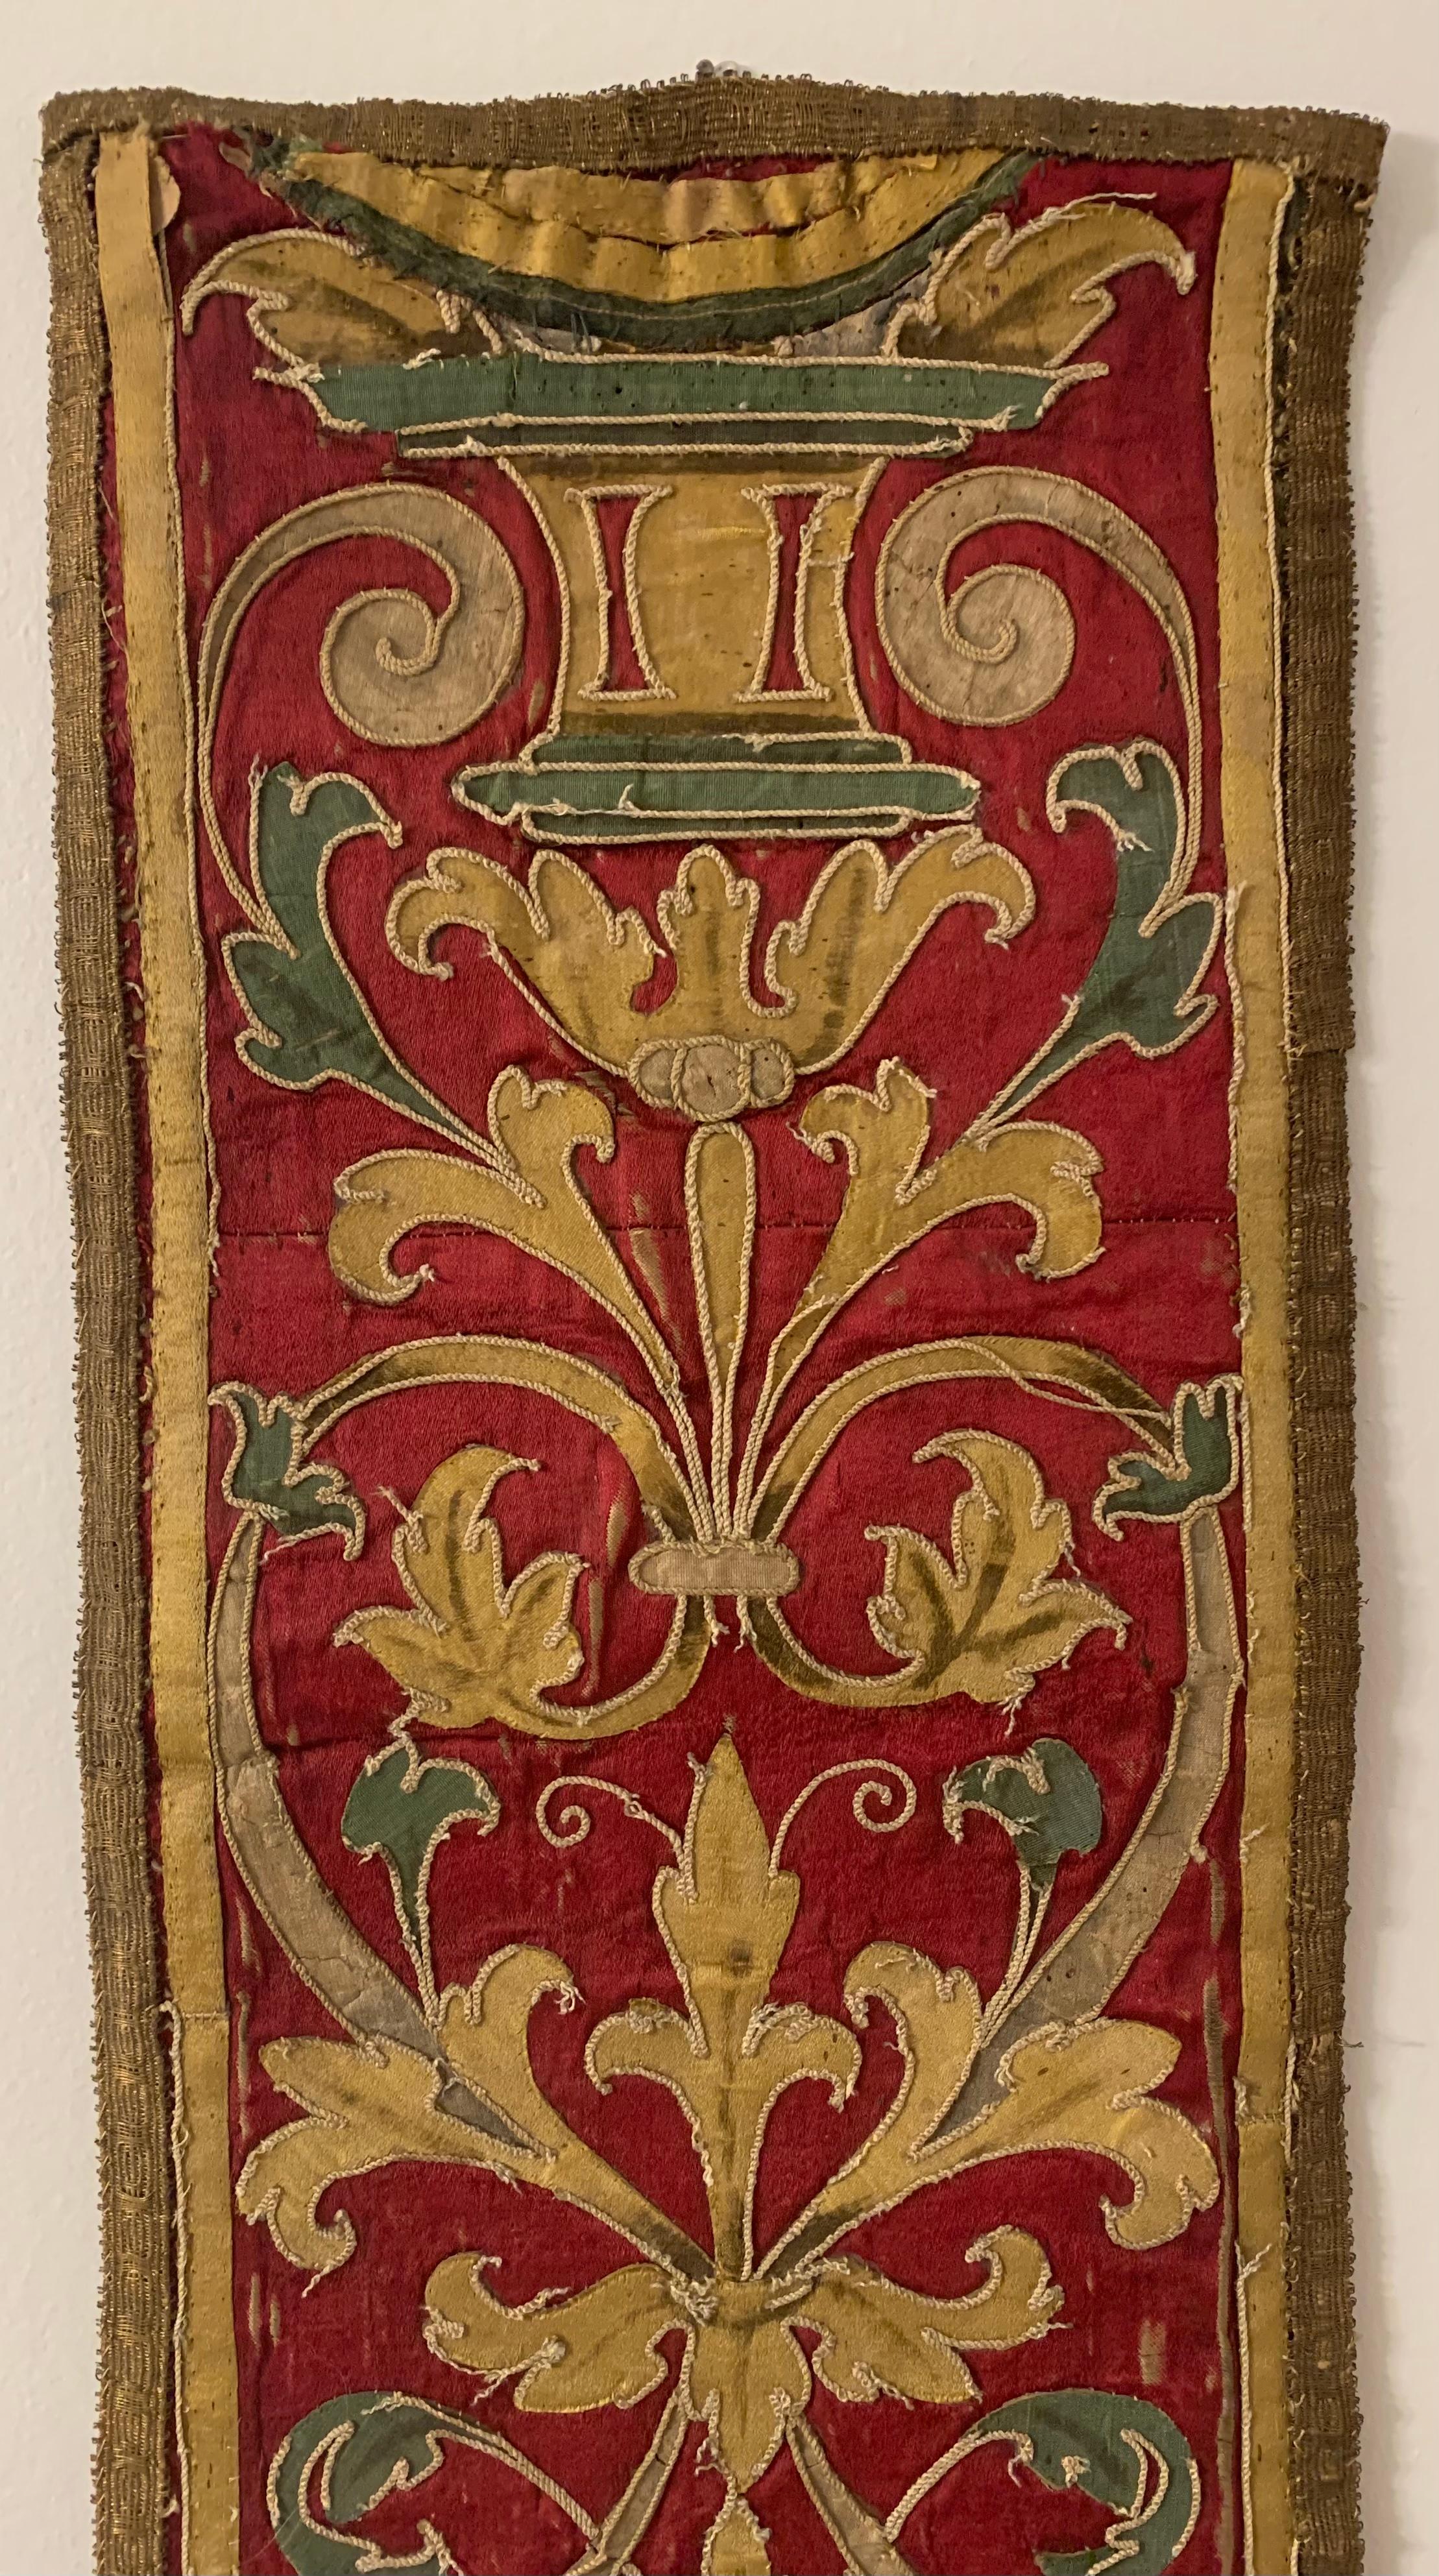 Fine 17th century Baroque period silk and metallic thread embroidery panel.
Excellent vibrant colors of bold burgundy, pale cream and beautiful, elegant teal with a border of textured woven metallic thread. Unusually fine state of preservation to